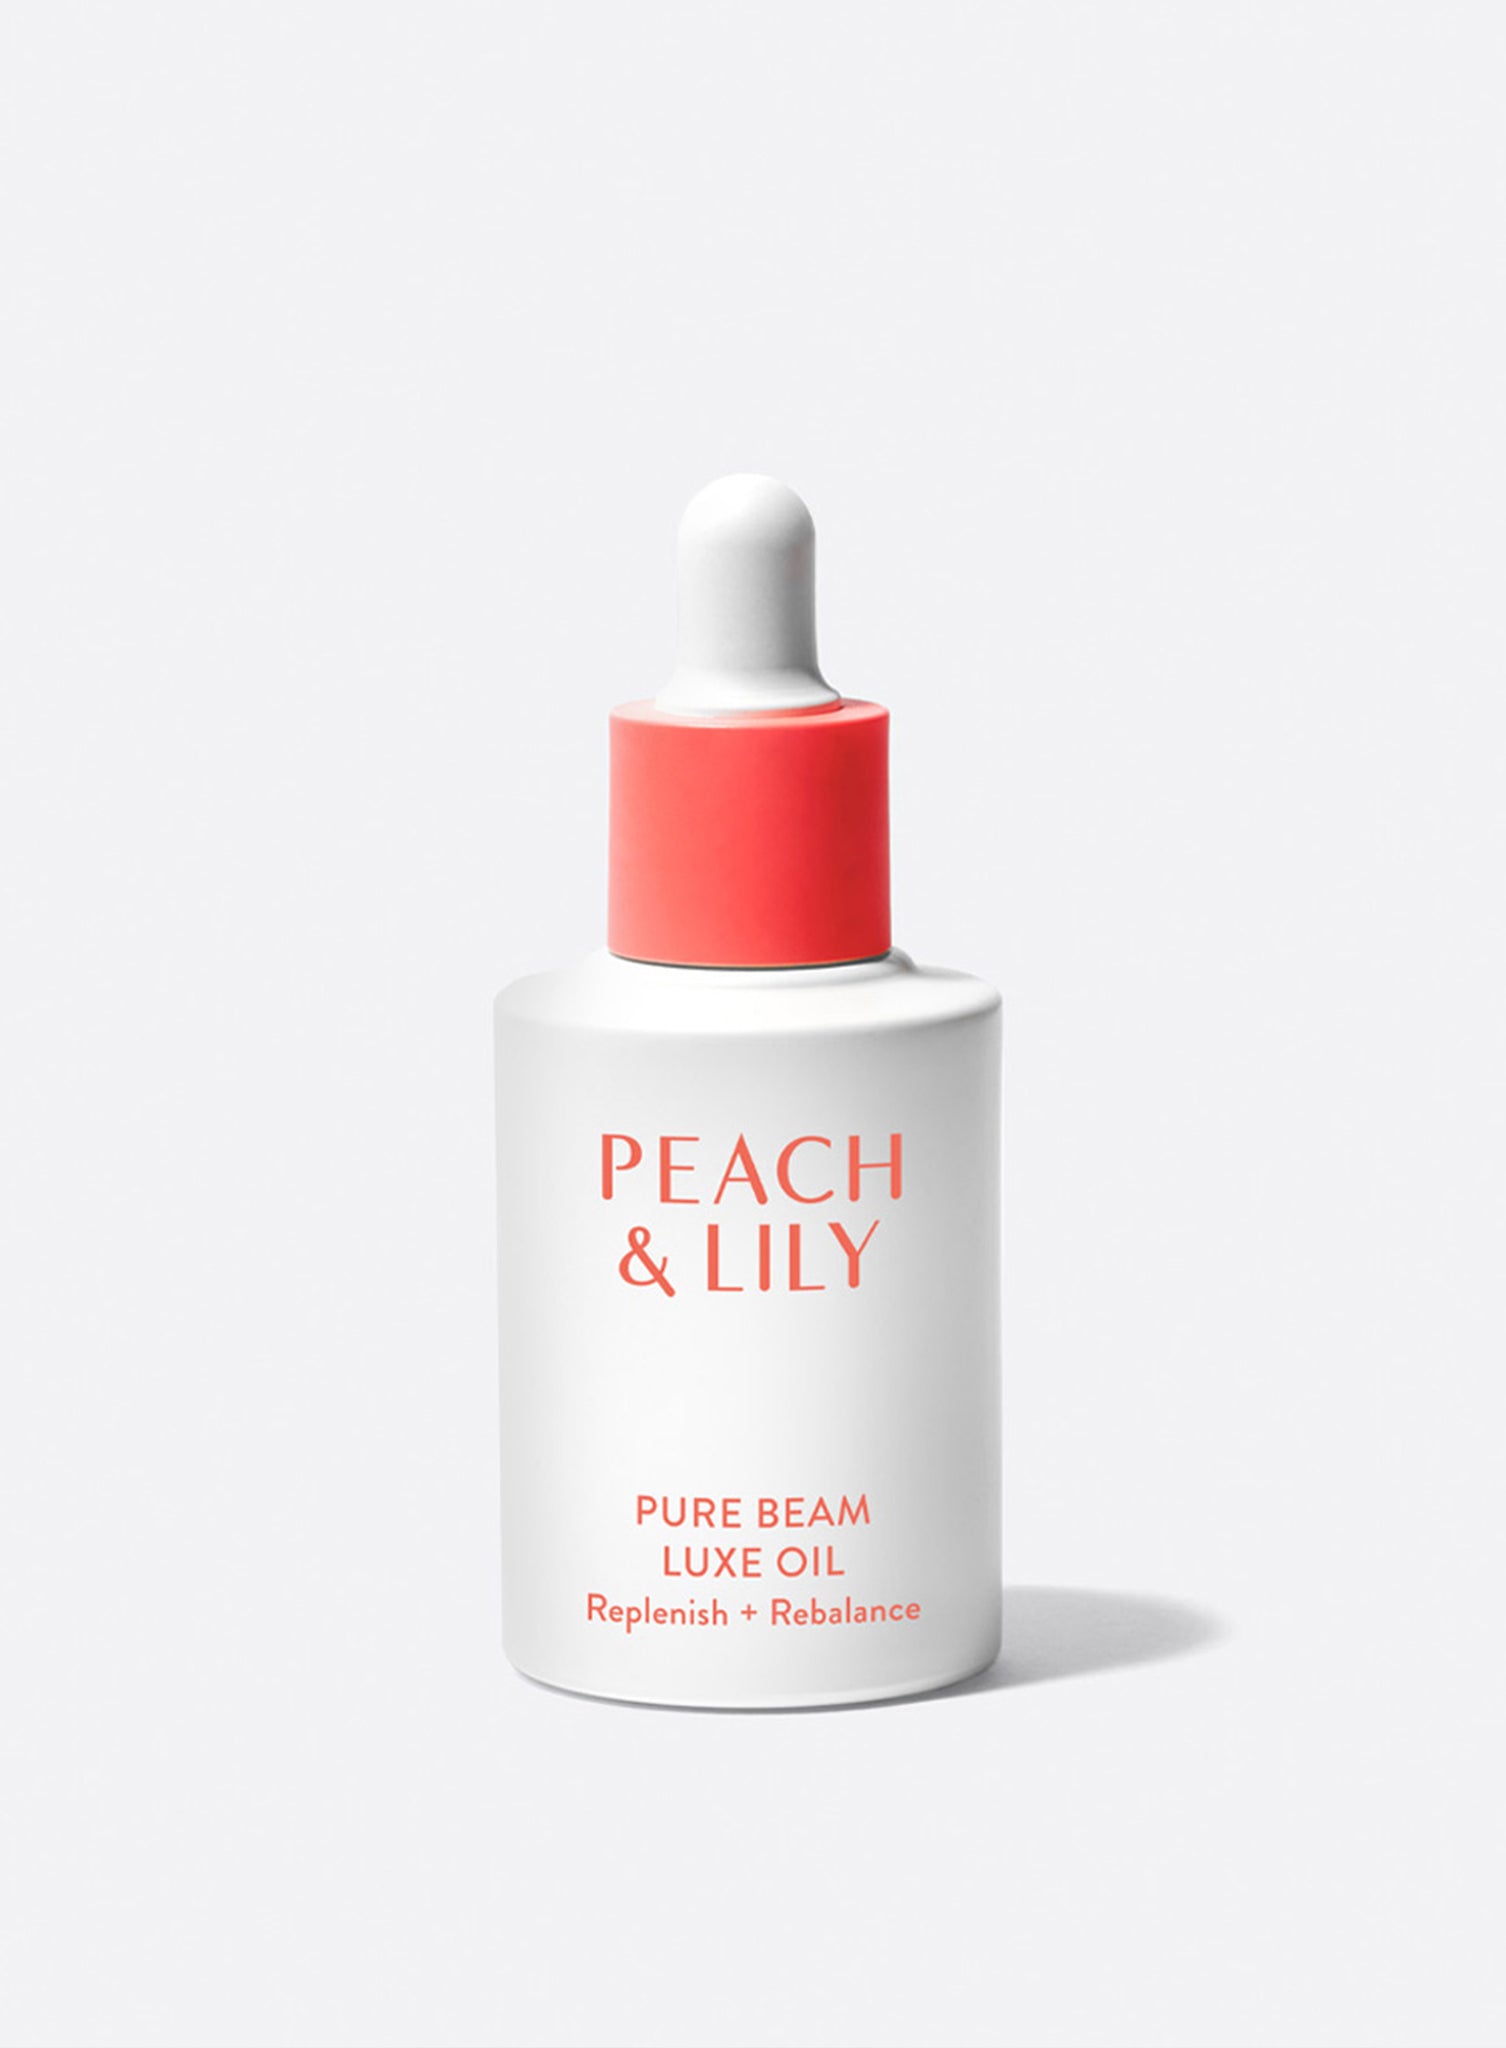 A bottle with a dropper of Peach & Lily Pure Beam Luxe Oil for replenishing and rebalancing skin